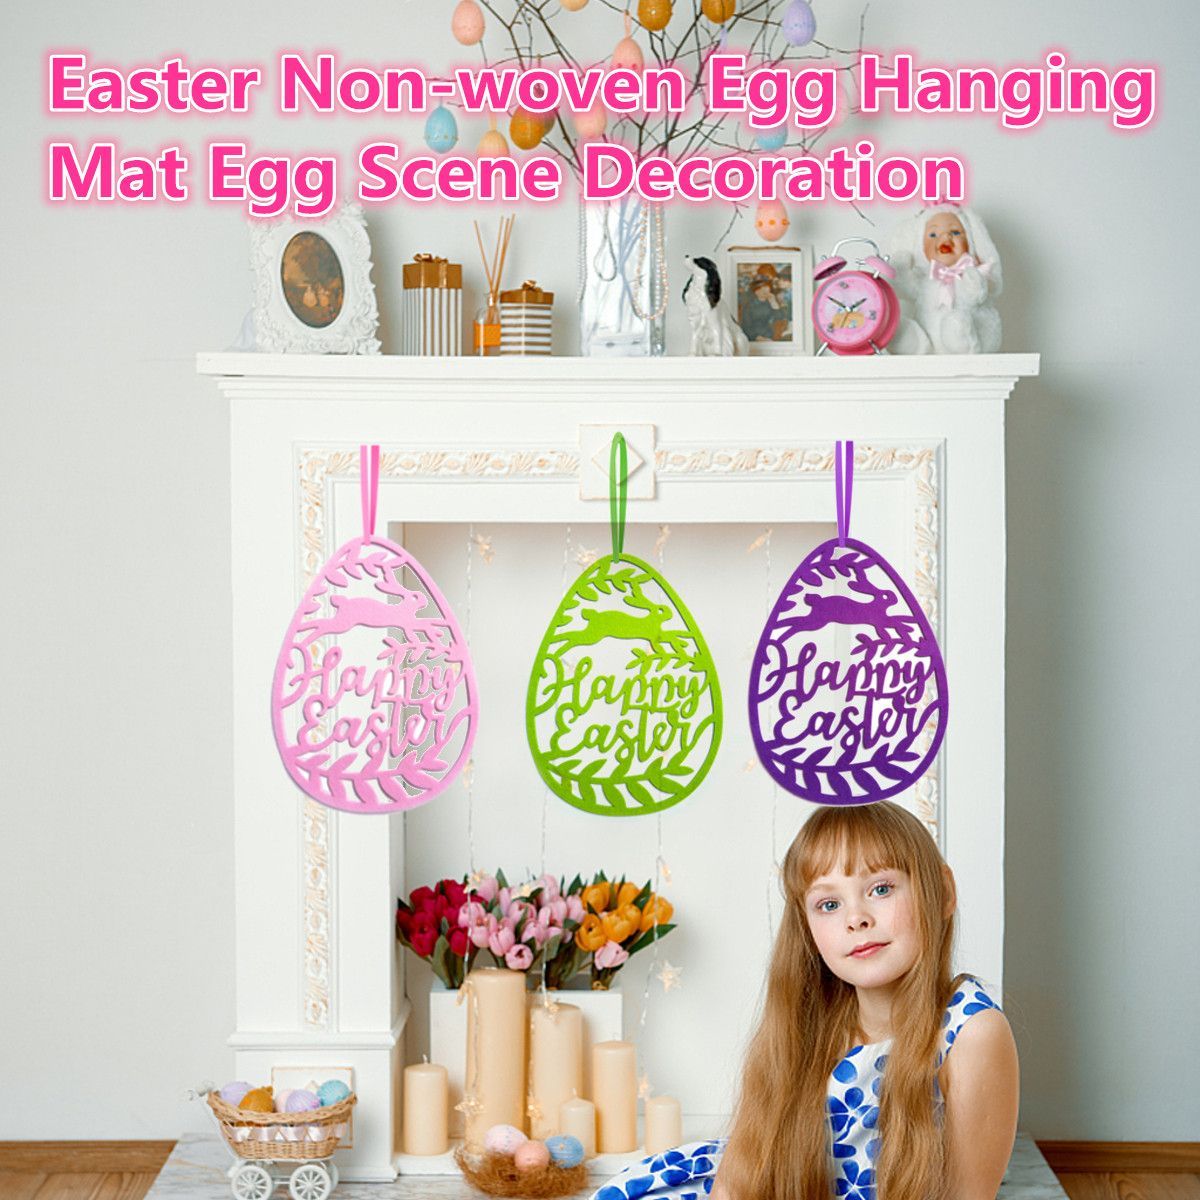 Hanging-Ornament-Easter-Eggs-Bunny-Pendant-Egg-Shape-Gifts-Wall-Door-Decorations-1446290